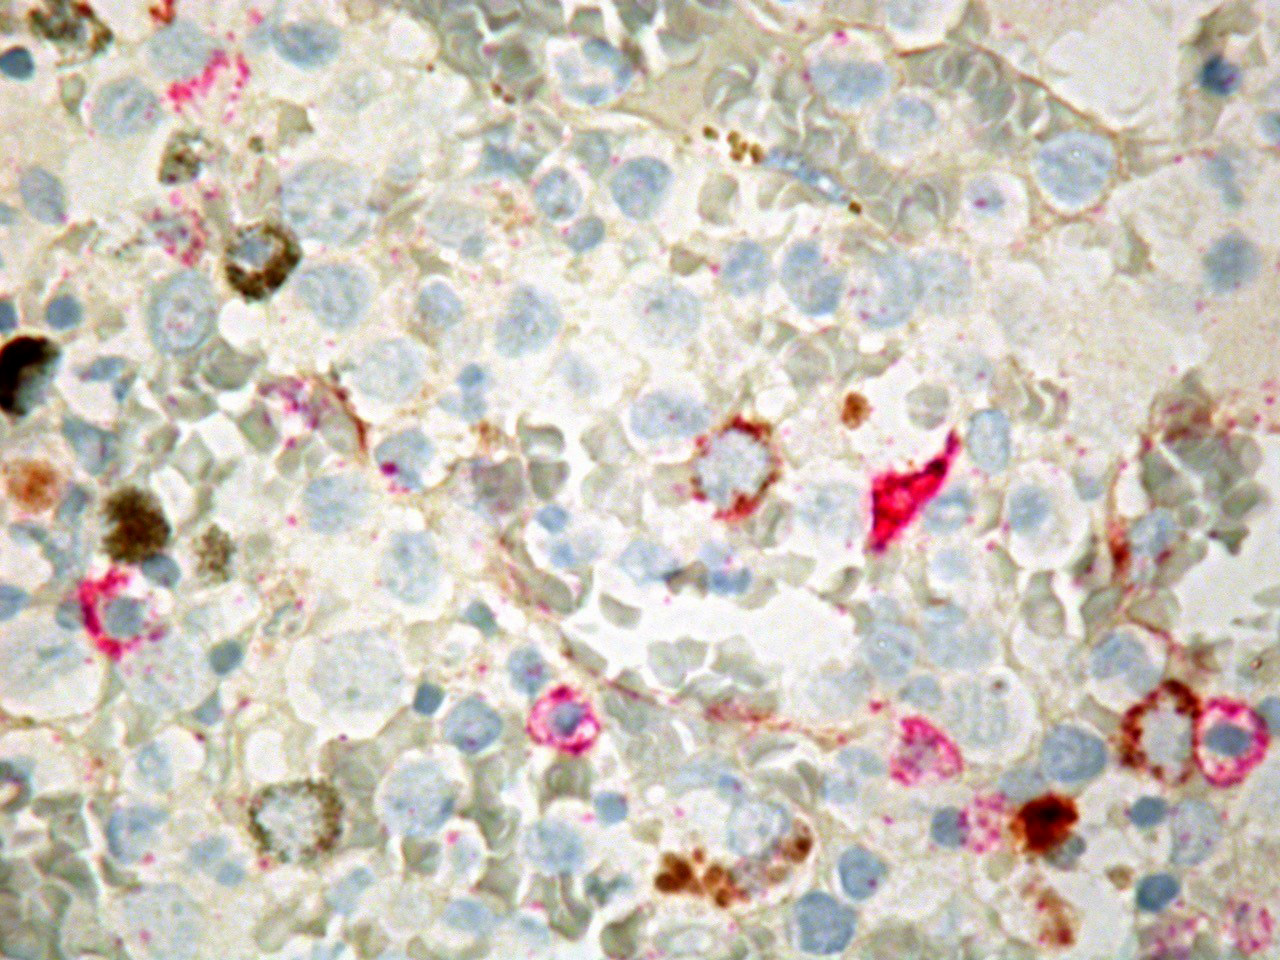 Immunohistochemical double staining (CD27 and CD34)